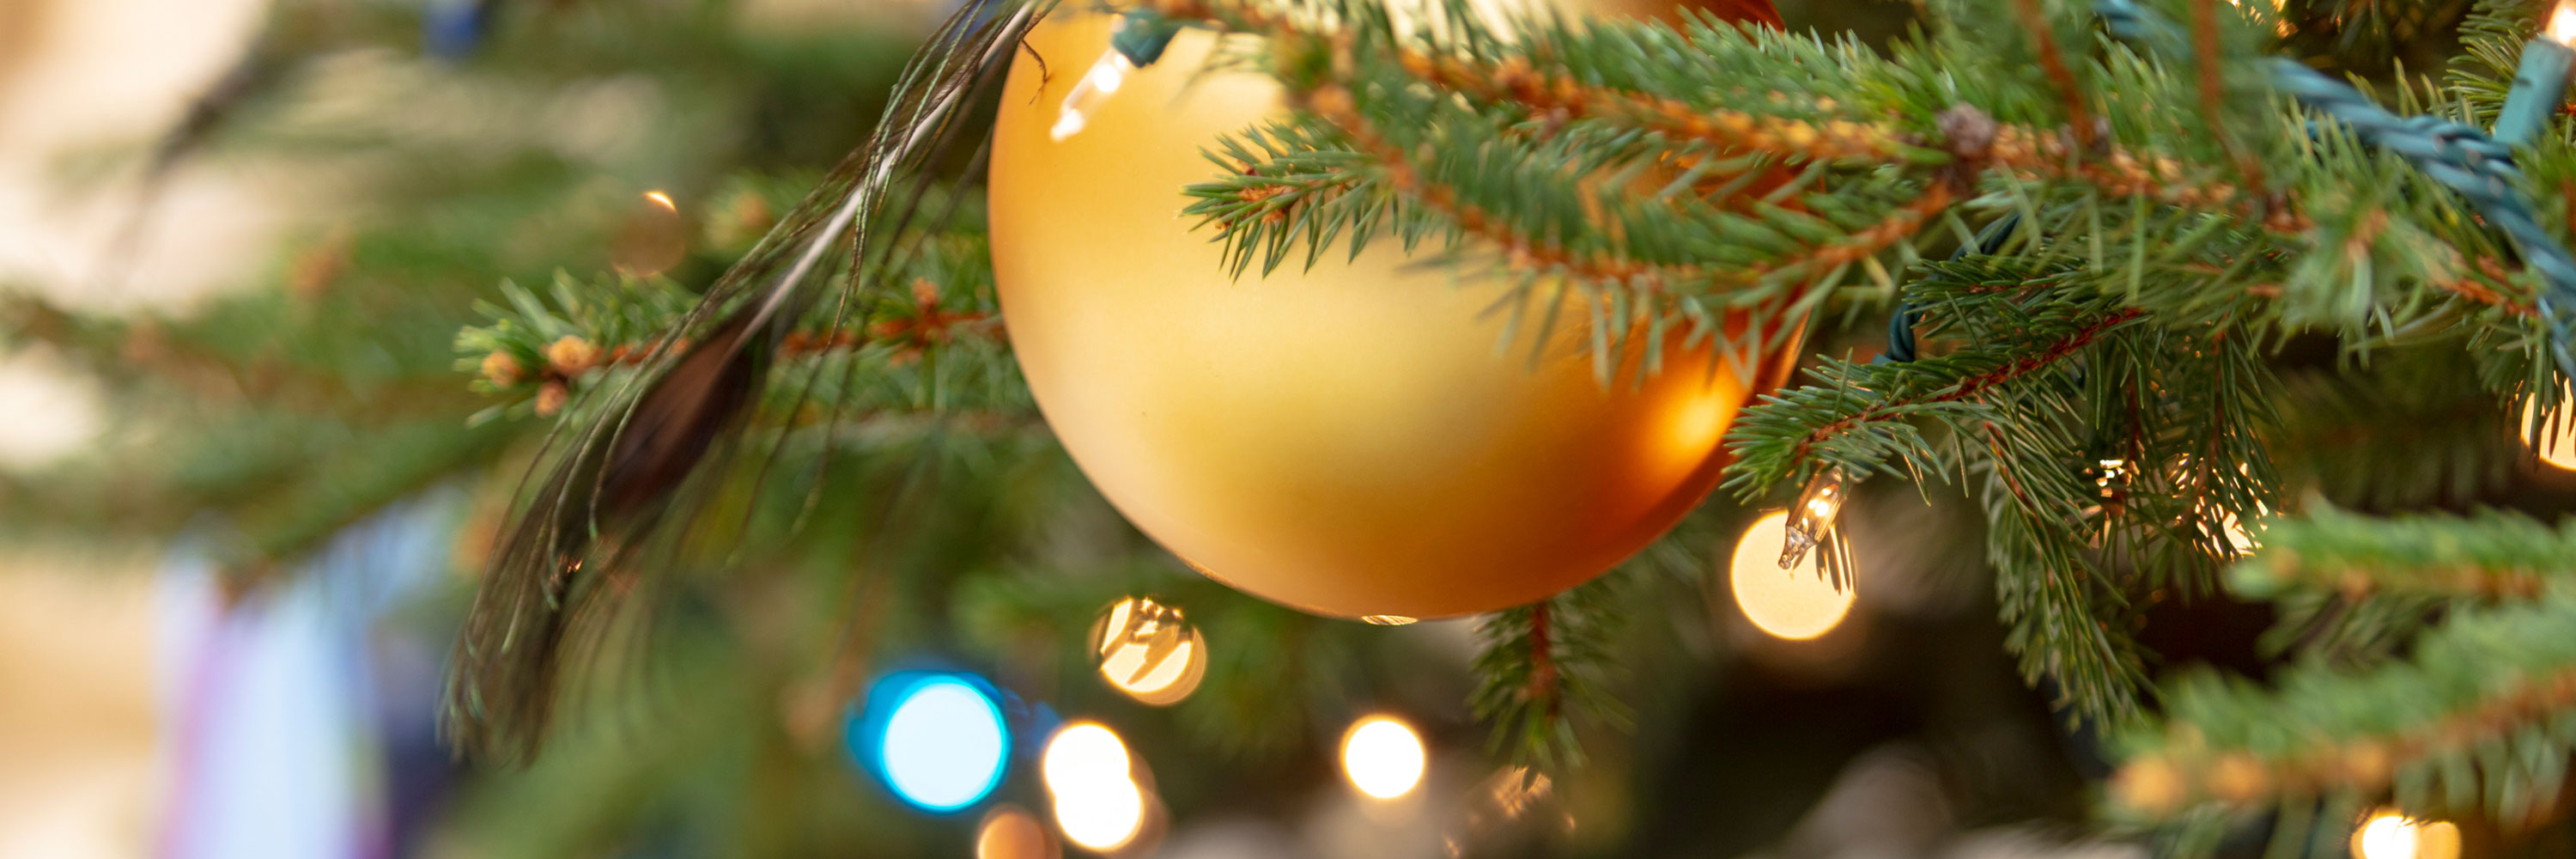 A close-up of ornaments and lights on an evergreen tree.